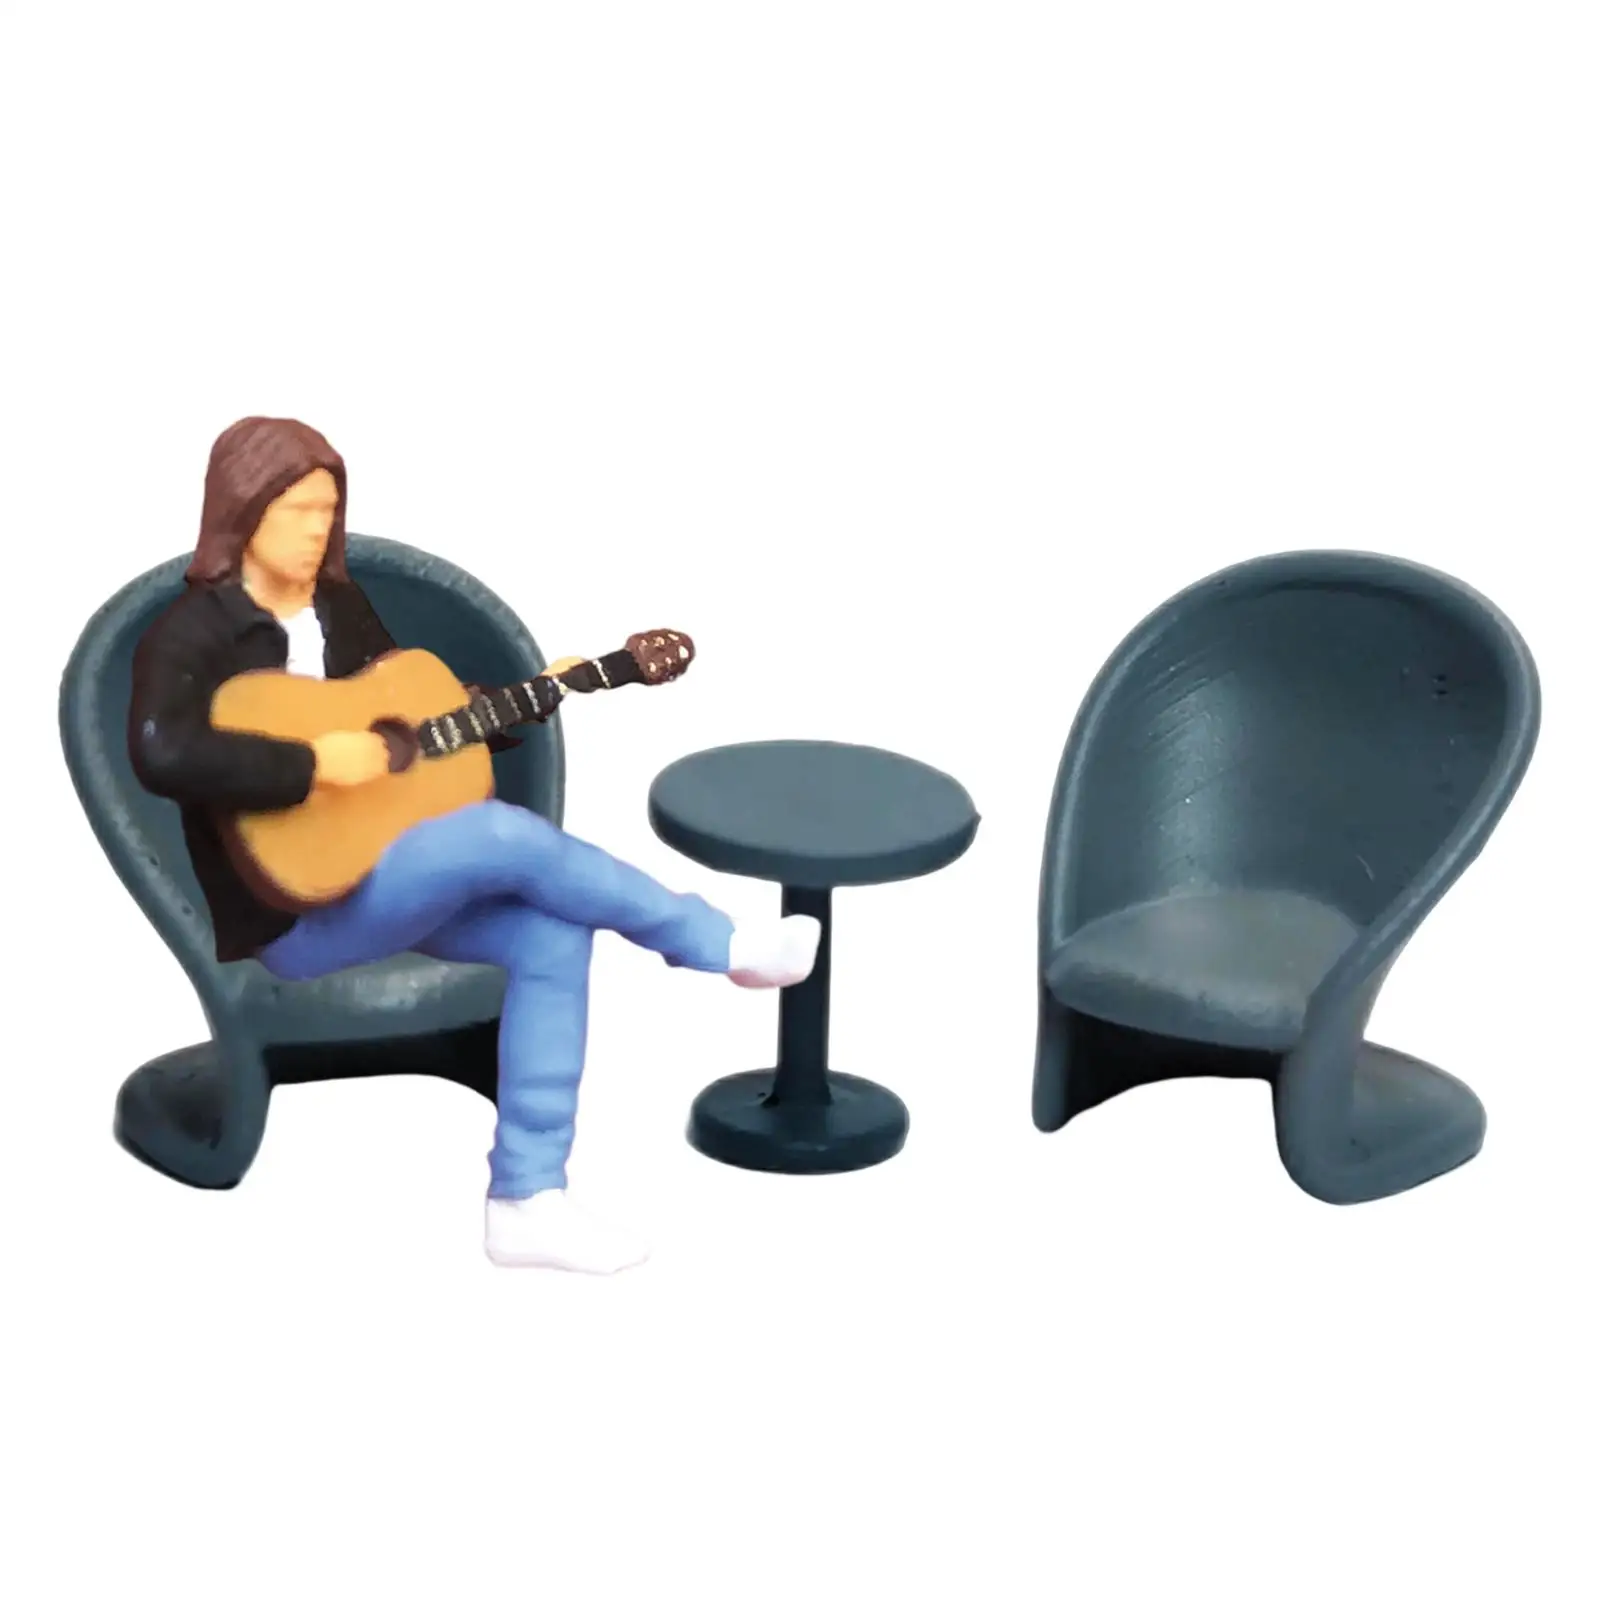 1/64 Scale Music Figurine Resin 1/64 Scale Band Figures for Micro Landscape Building Desktop Decoration Diorama Layout